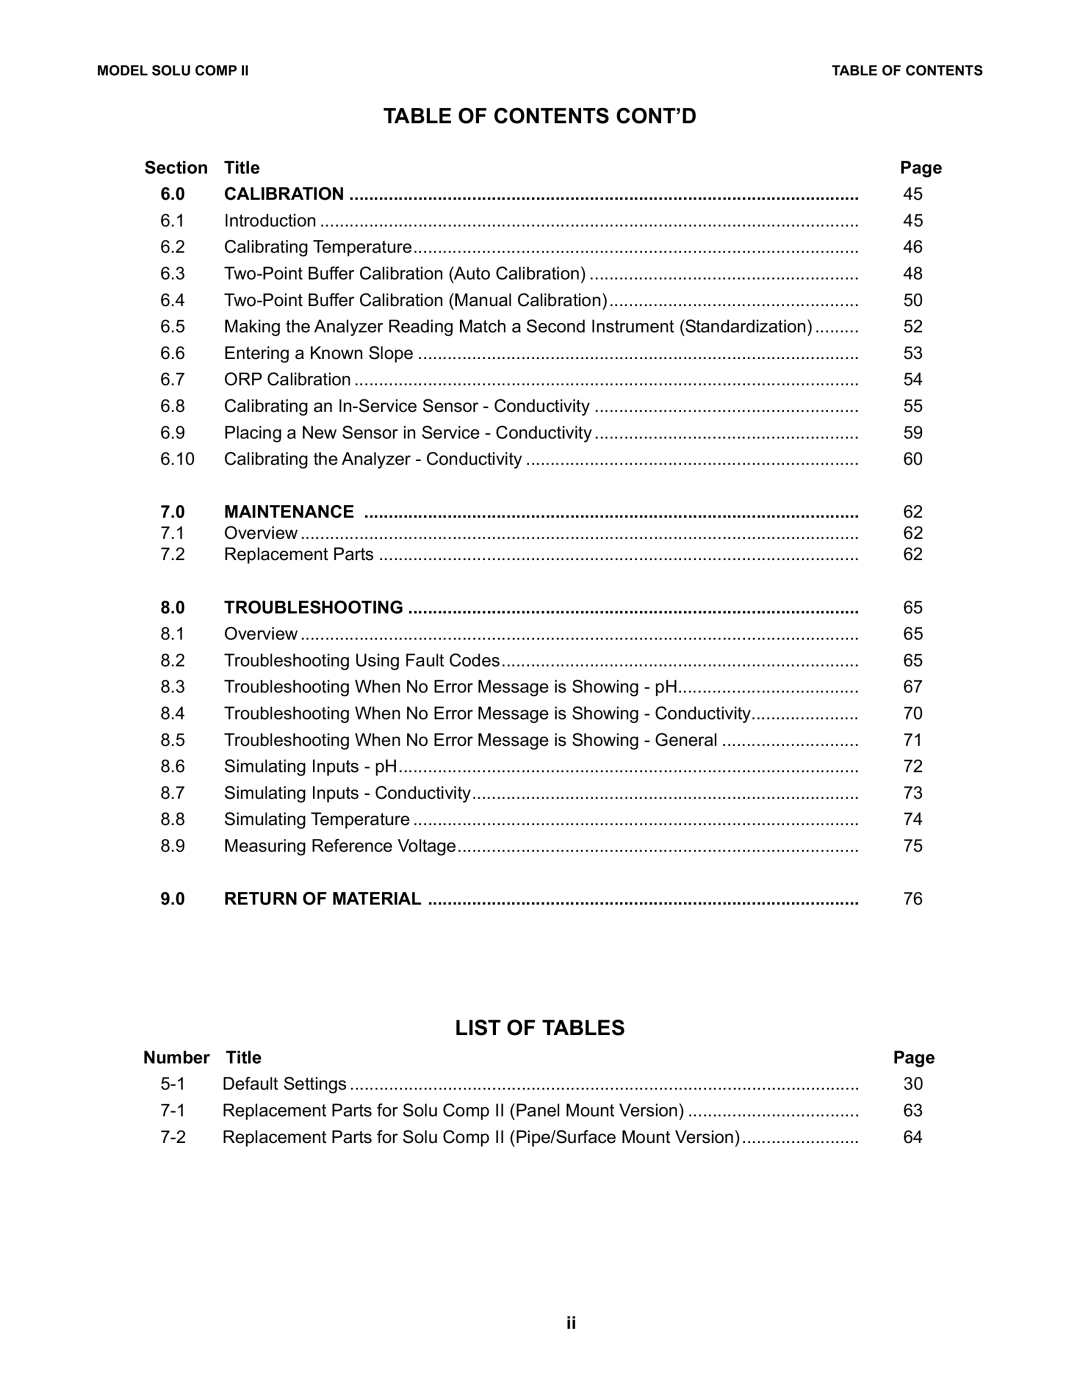 Emerson PN 51-1055pHC/rev.K instruction manual Table of Contents CONT’D, List of Tables 